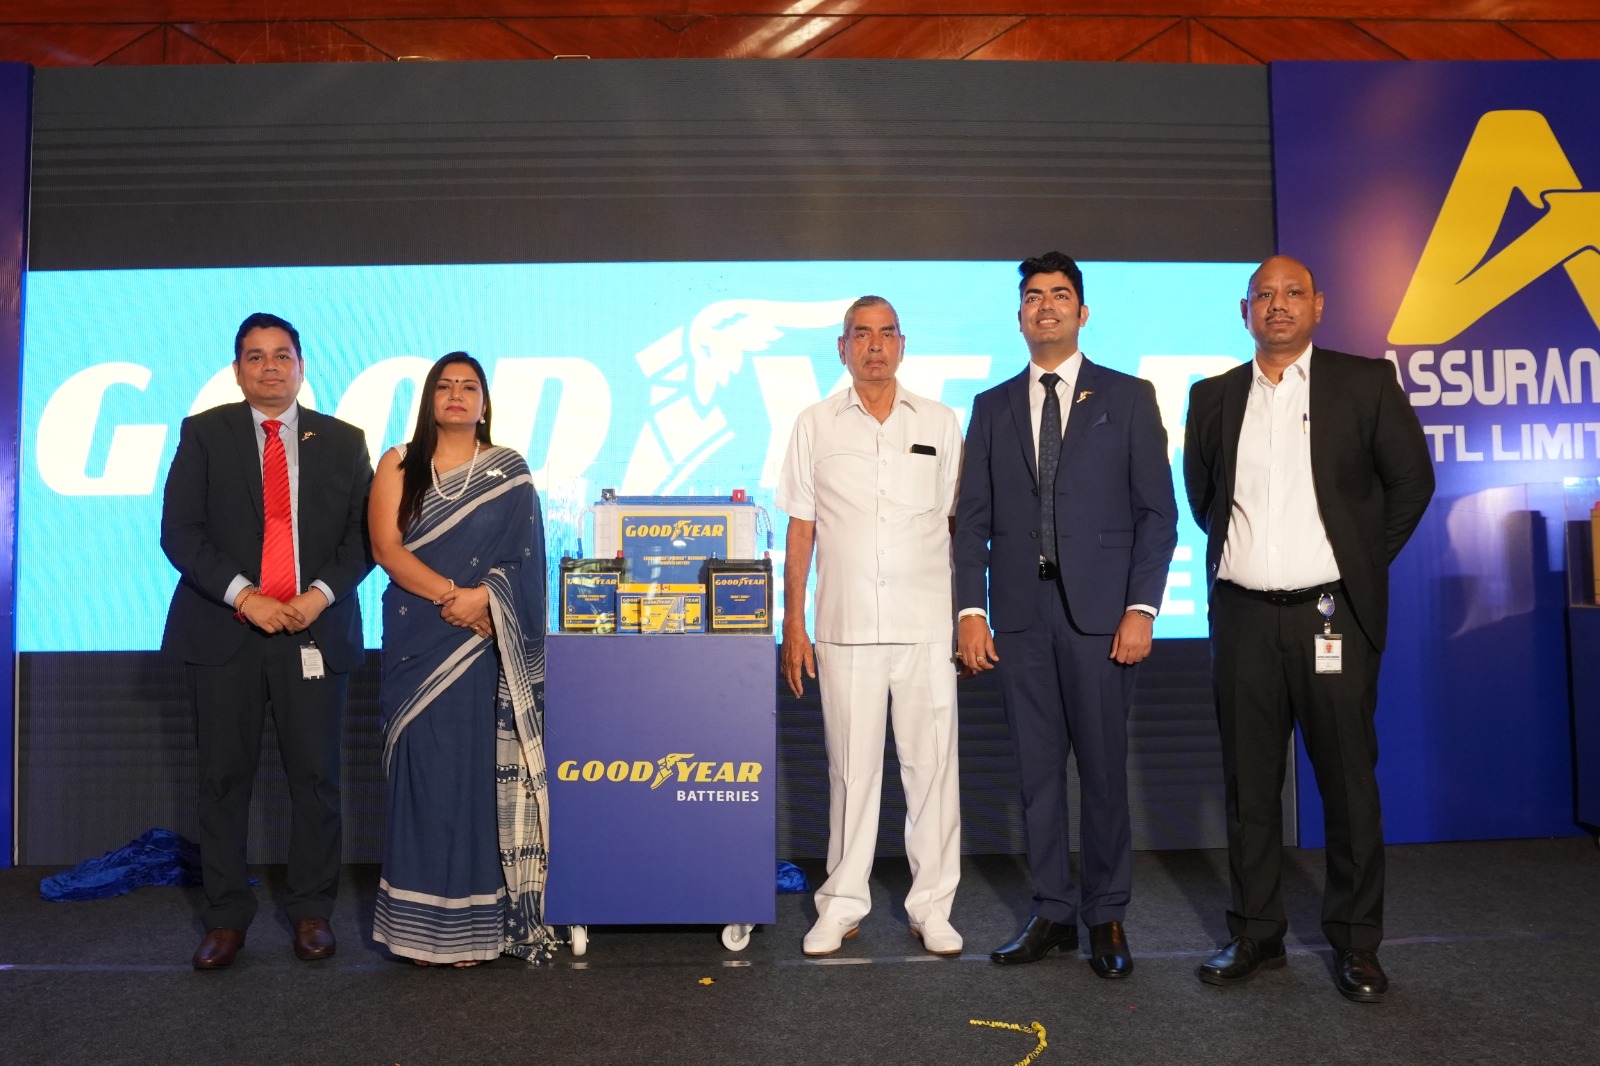 ASSURANCE INTL AND GOODYEAR ANNOUNCE NEW LINE OF FILTERS & BATTERIES IN INDIA